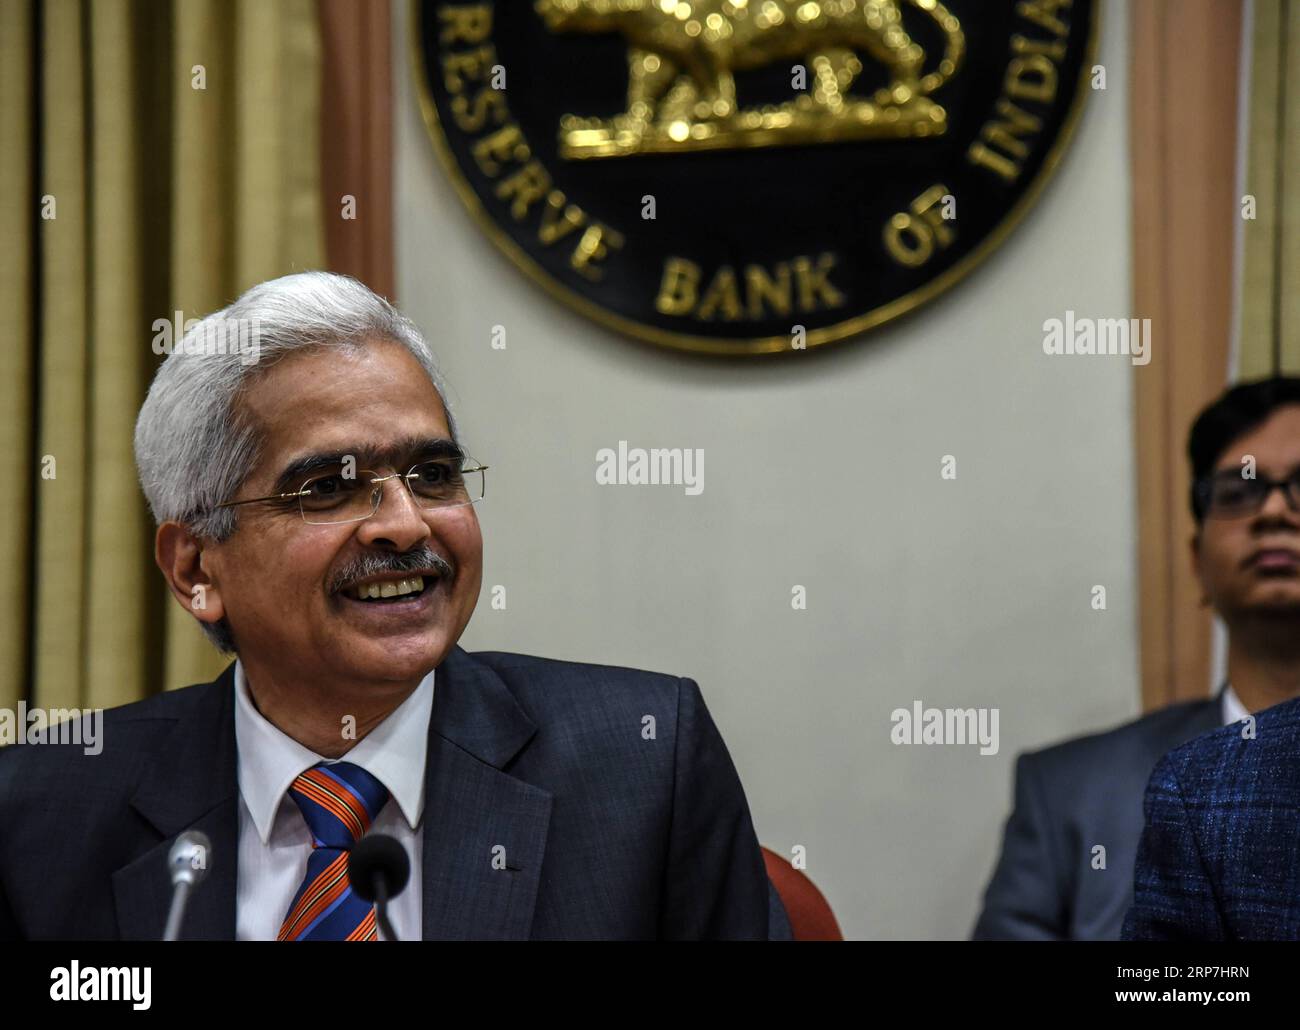 (190207) -- MUMBAI, Feb. 7, 2019 (Xinhua) -- The Reserve Bank of India (RBI) Governor Shaktikanta Das attends a news conference after a monetary policy review in Mumbai, India, Feb. 7, 2019. India s central bank - the Reserve Bank of India (RBI) on Thursday reduced the repo rate, or the interest rate at which it lends money to banks, by a marginal 25 basis points. The new repo rate now stands at 6.25 percent from the earlier 6.50 percent. (Xinhua/Stringer) INDIA-MUMBAI-RBI GOVERNOR-PRESS CONFERENCE PUBLICATIONxNOTxINxCHN Stock Photo